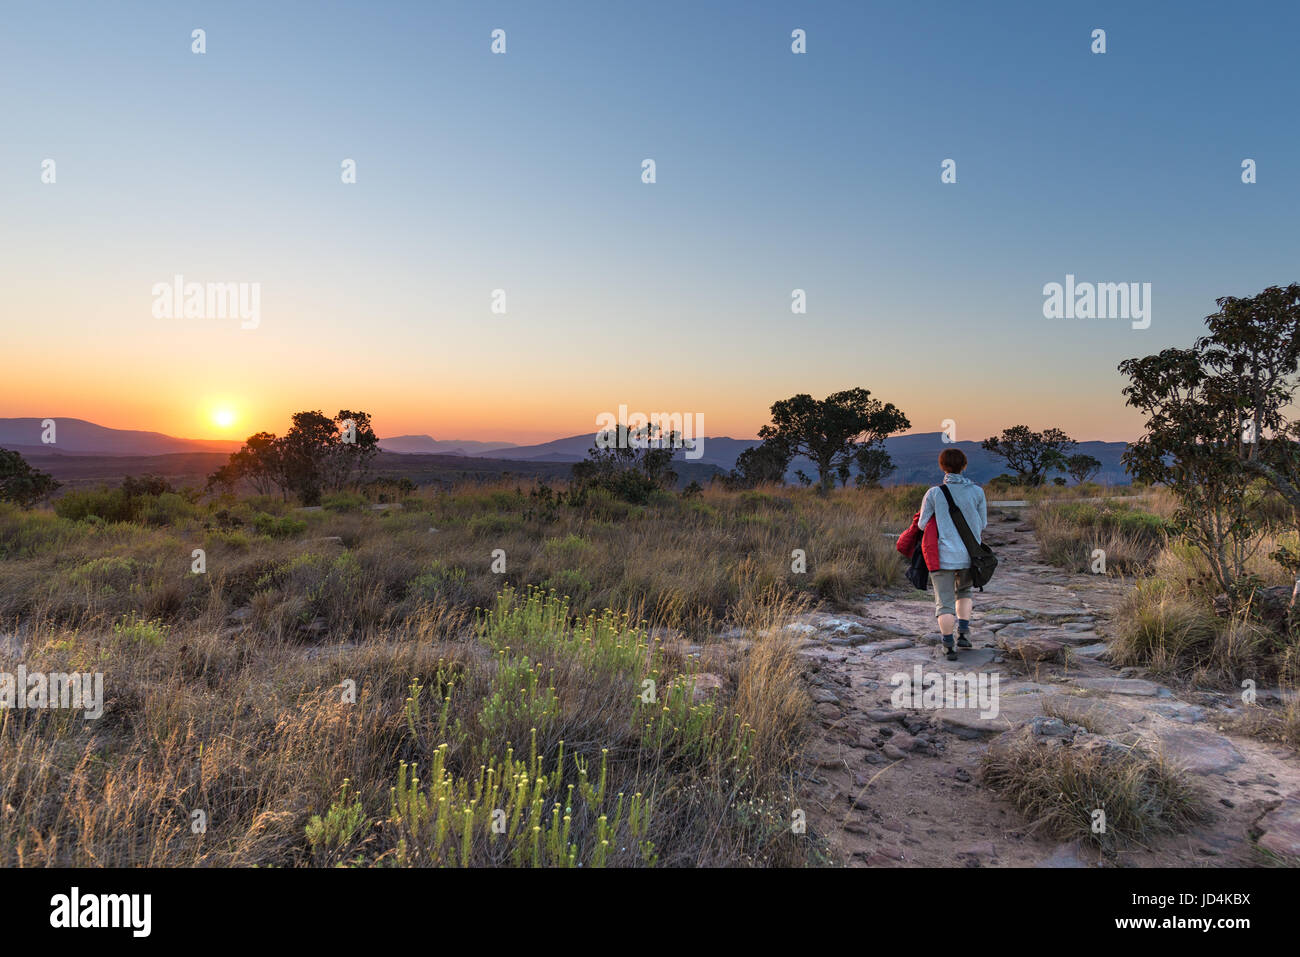 Sunset on the plateau at Blyde River Canyon, famous travel destination in South Africa. One person walking in the bush, rear view. Stock Photo